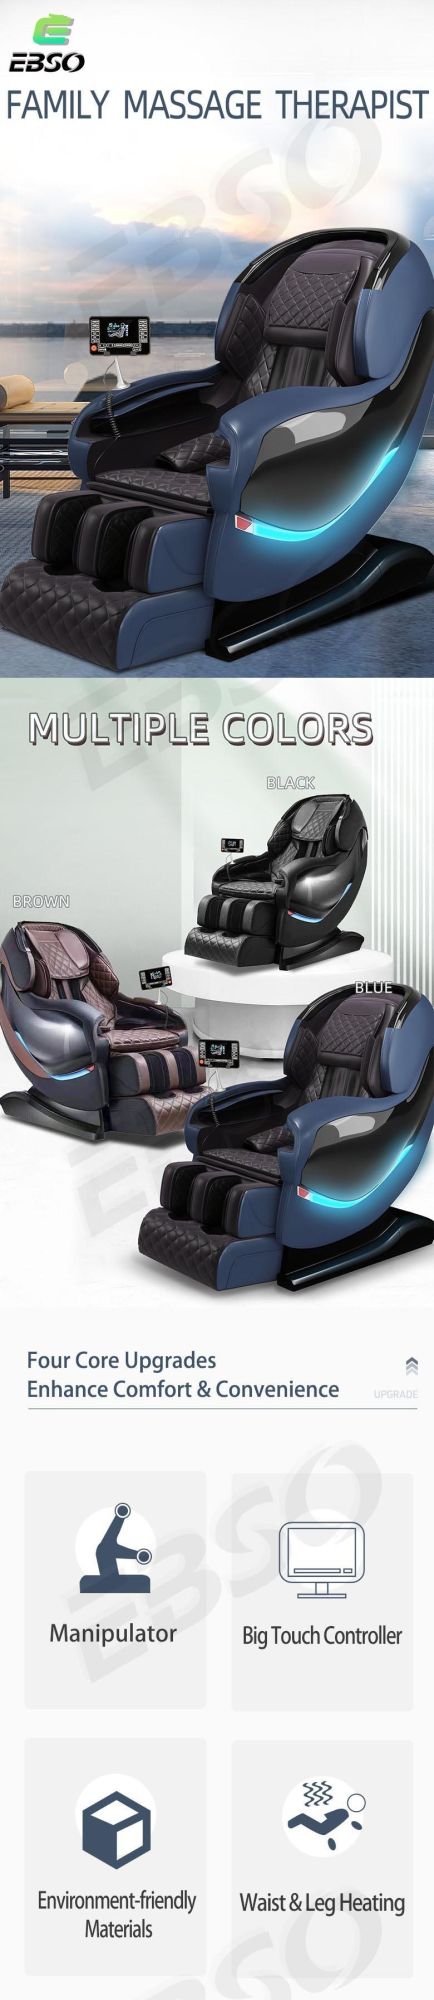 Wholesale Price Multi-Colored ABS and PU Practical Professional 4D Zero Gravity Massage Chair